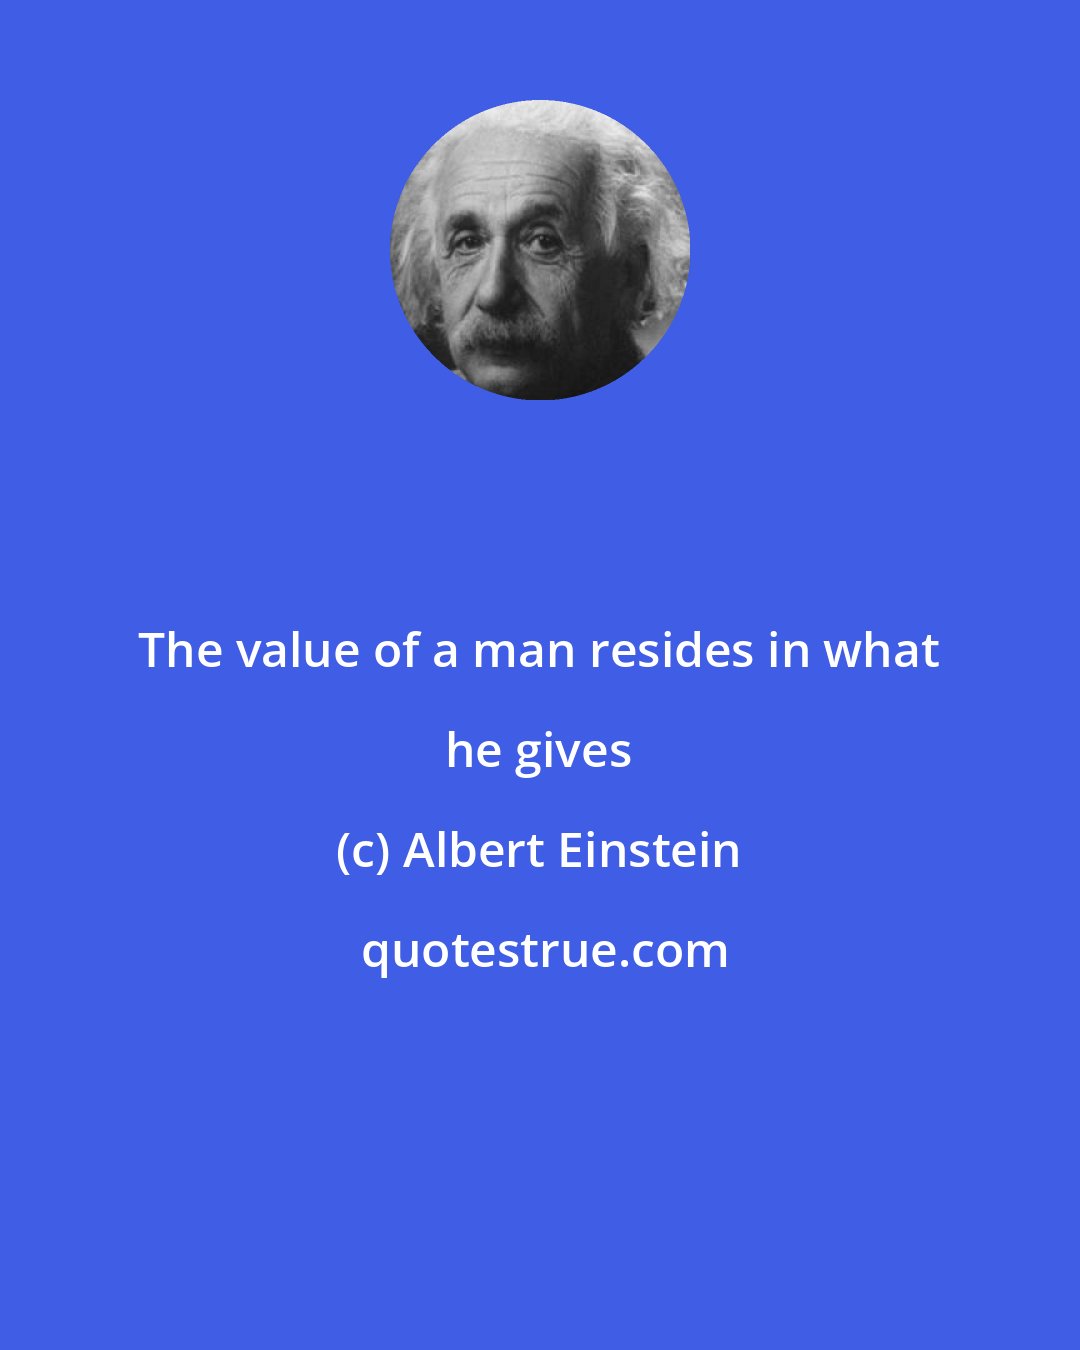 Albert Einstein: The value of a man resides in what he gives